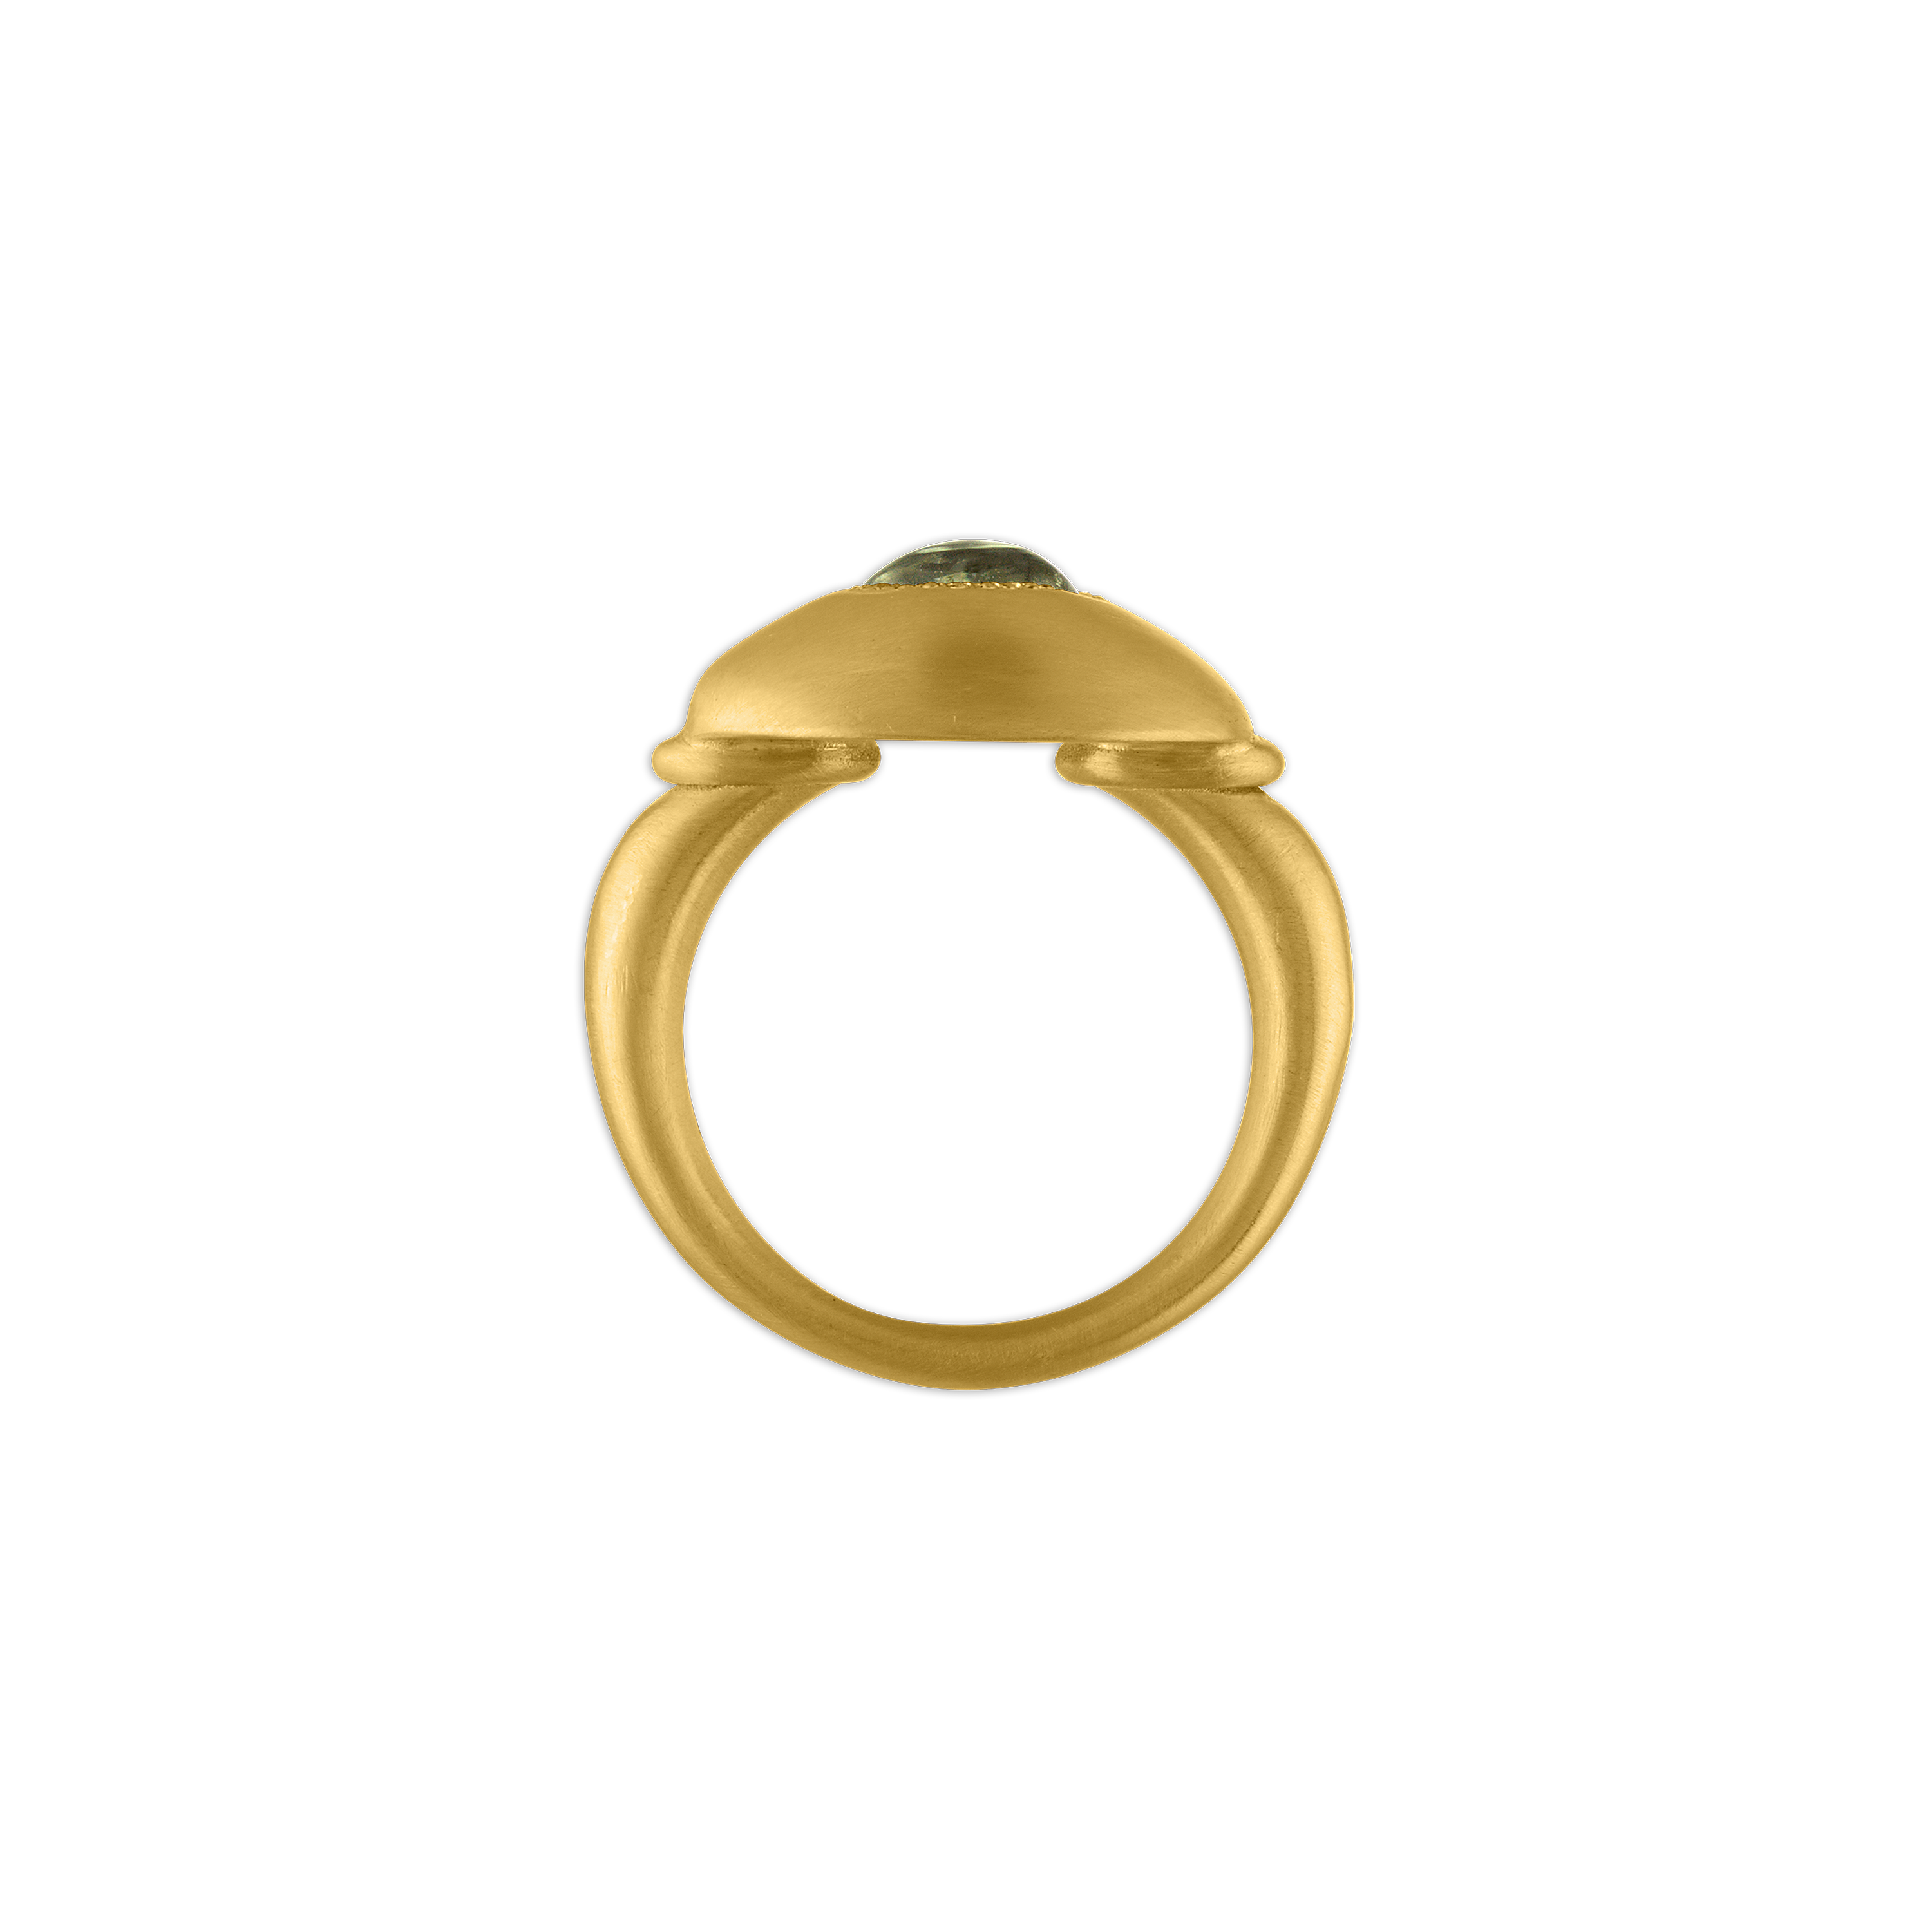 Bvlgari Gold And Diamond Band Available For Immediate Sale At